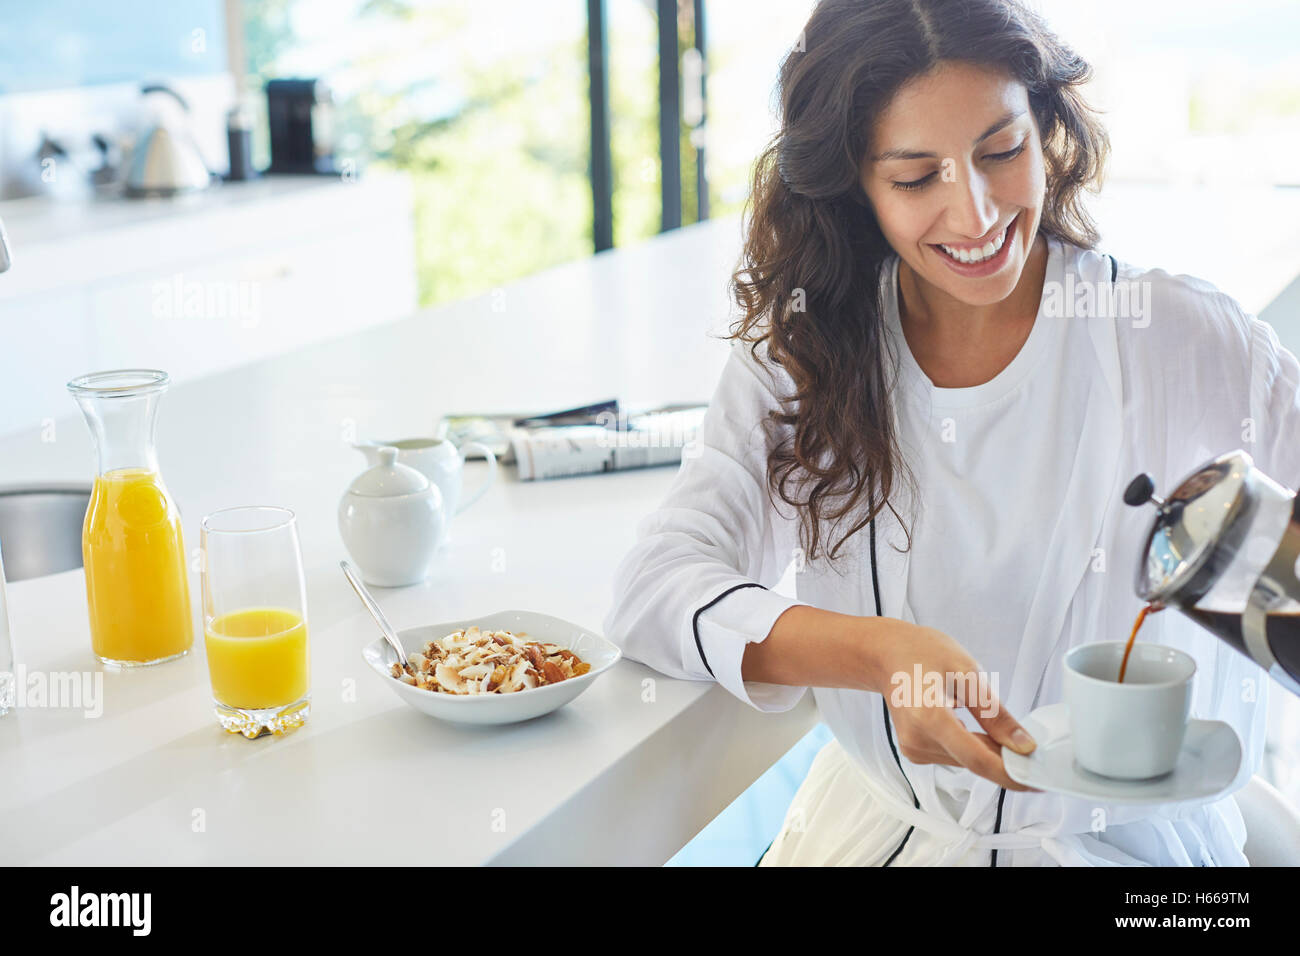 Smiling woman in bathrobe pouring French press coffee in kitchen Stock Photo